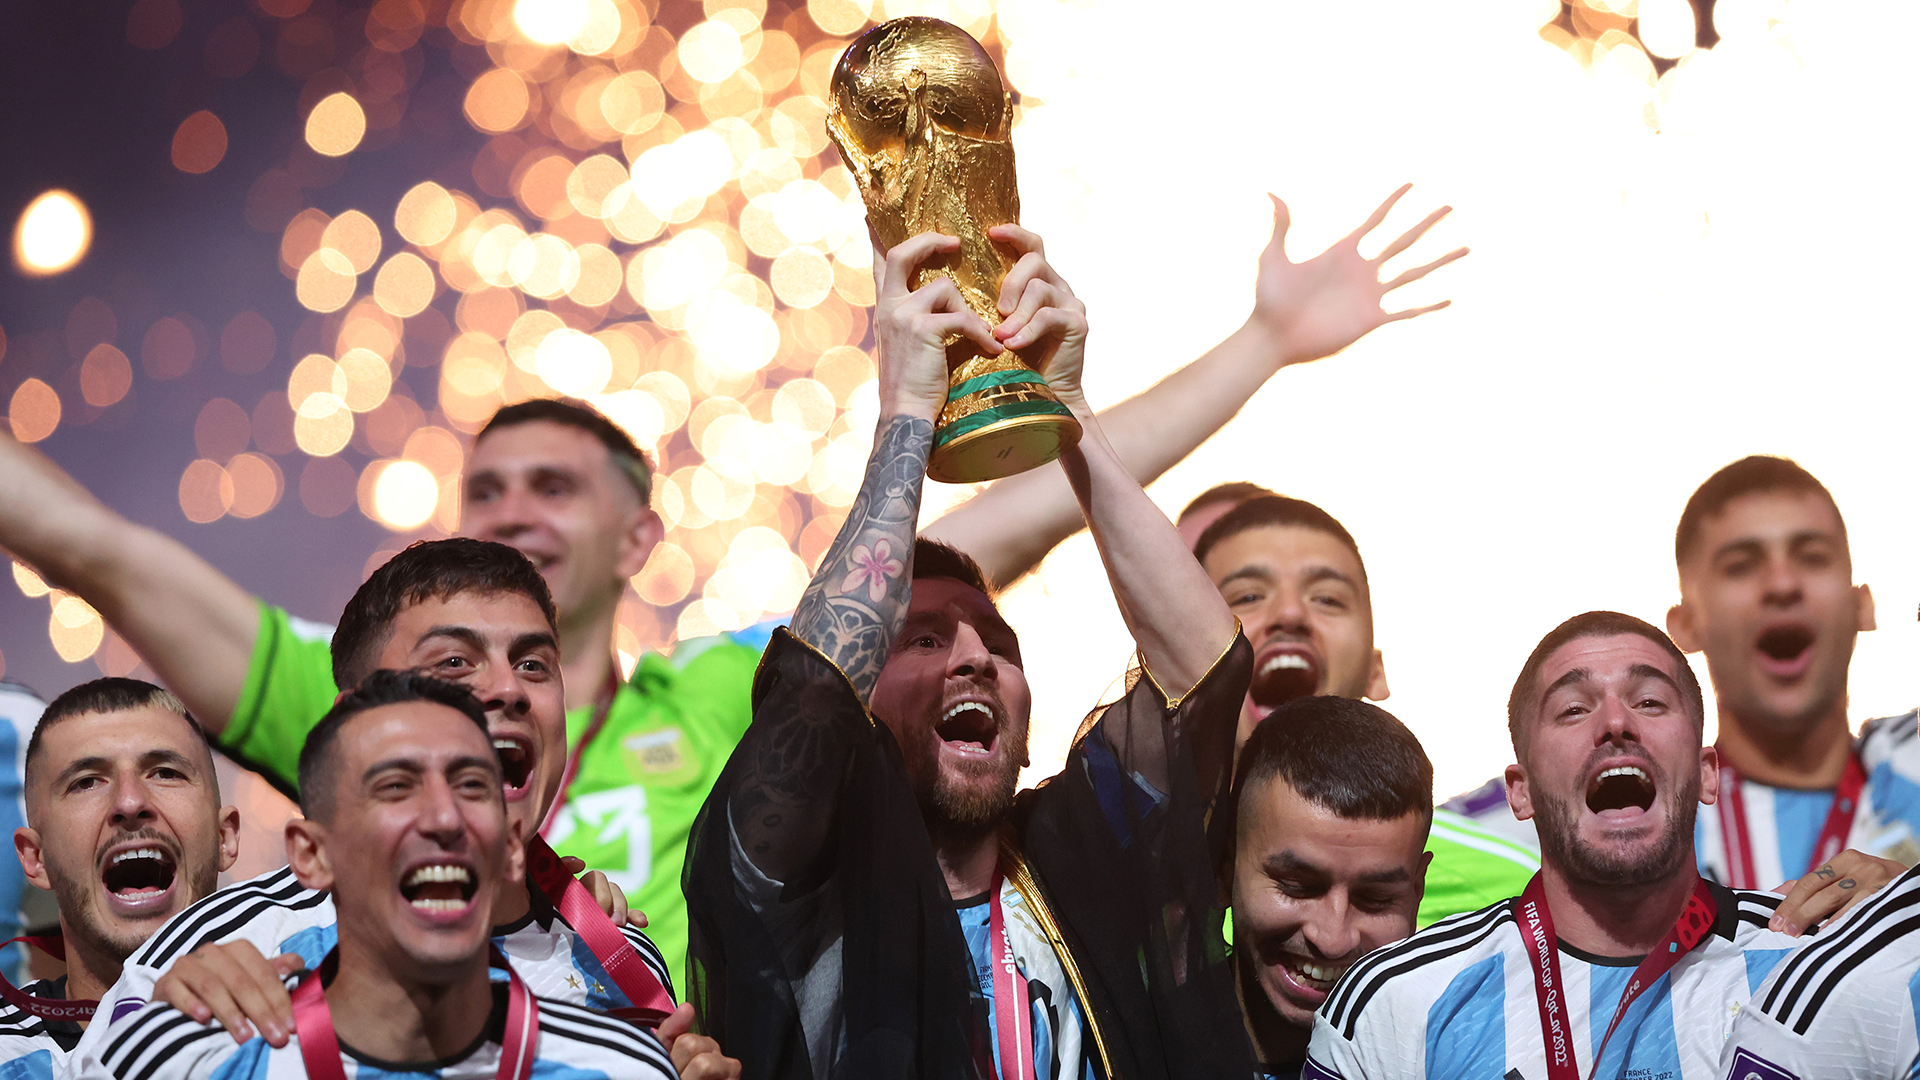 Lionel Messi, Captain of Argentina lifts the FIFA World Cup Trophy following his team's victory in the FIFA World Cup Qatar 2022 Final match between Argentina and France at Lusail Stadium on December 18, 2022 in Lusail City, Qatar.